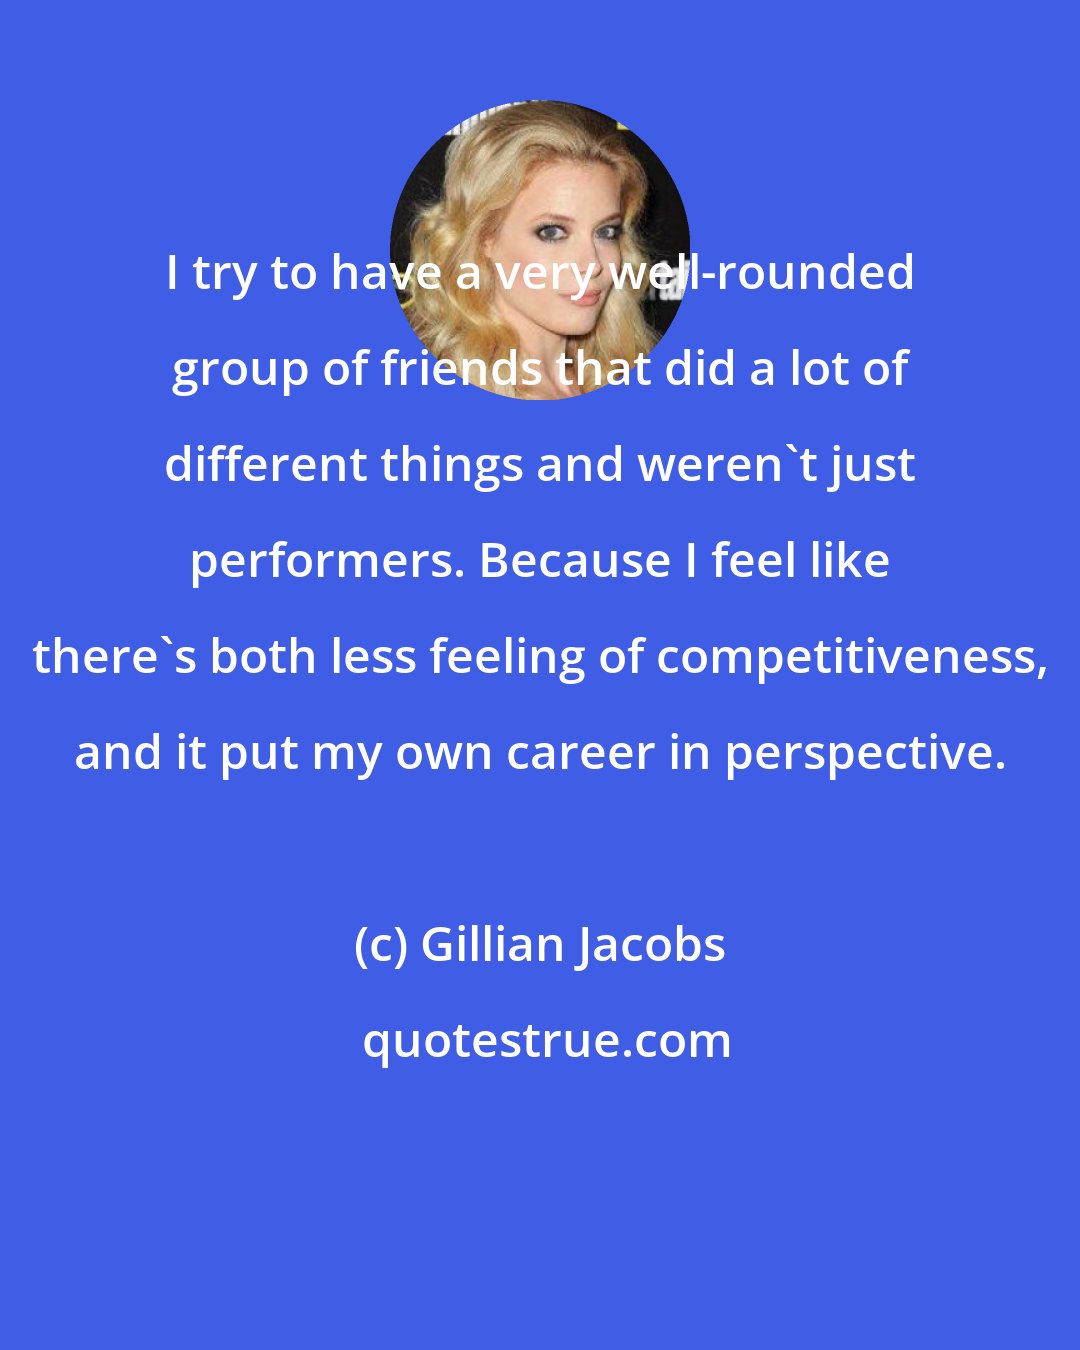 Gillian Jacobs: I try to have a very well-rounded group of friends that did a lot of different things and weren't just performers. Because I feel like there's both less feeling of competitiveness, and it put my own career in perspective.